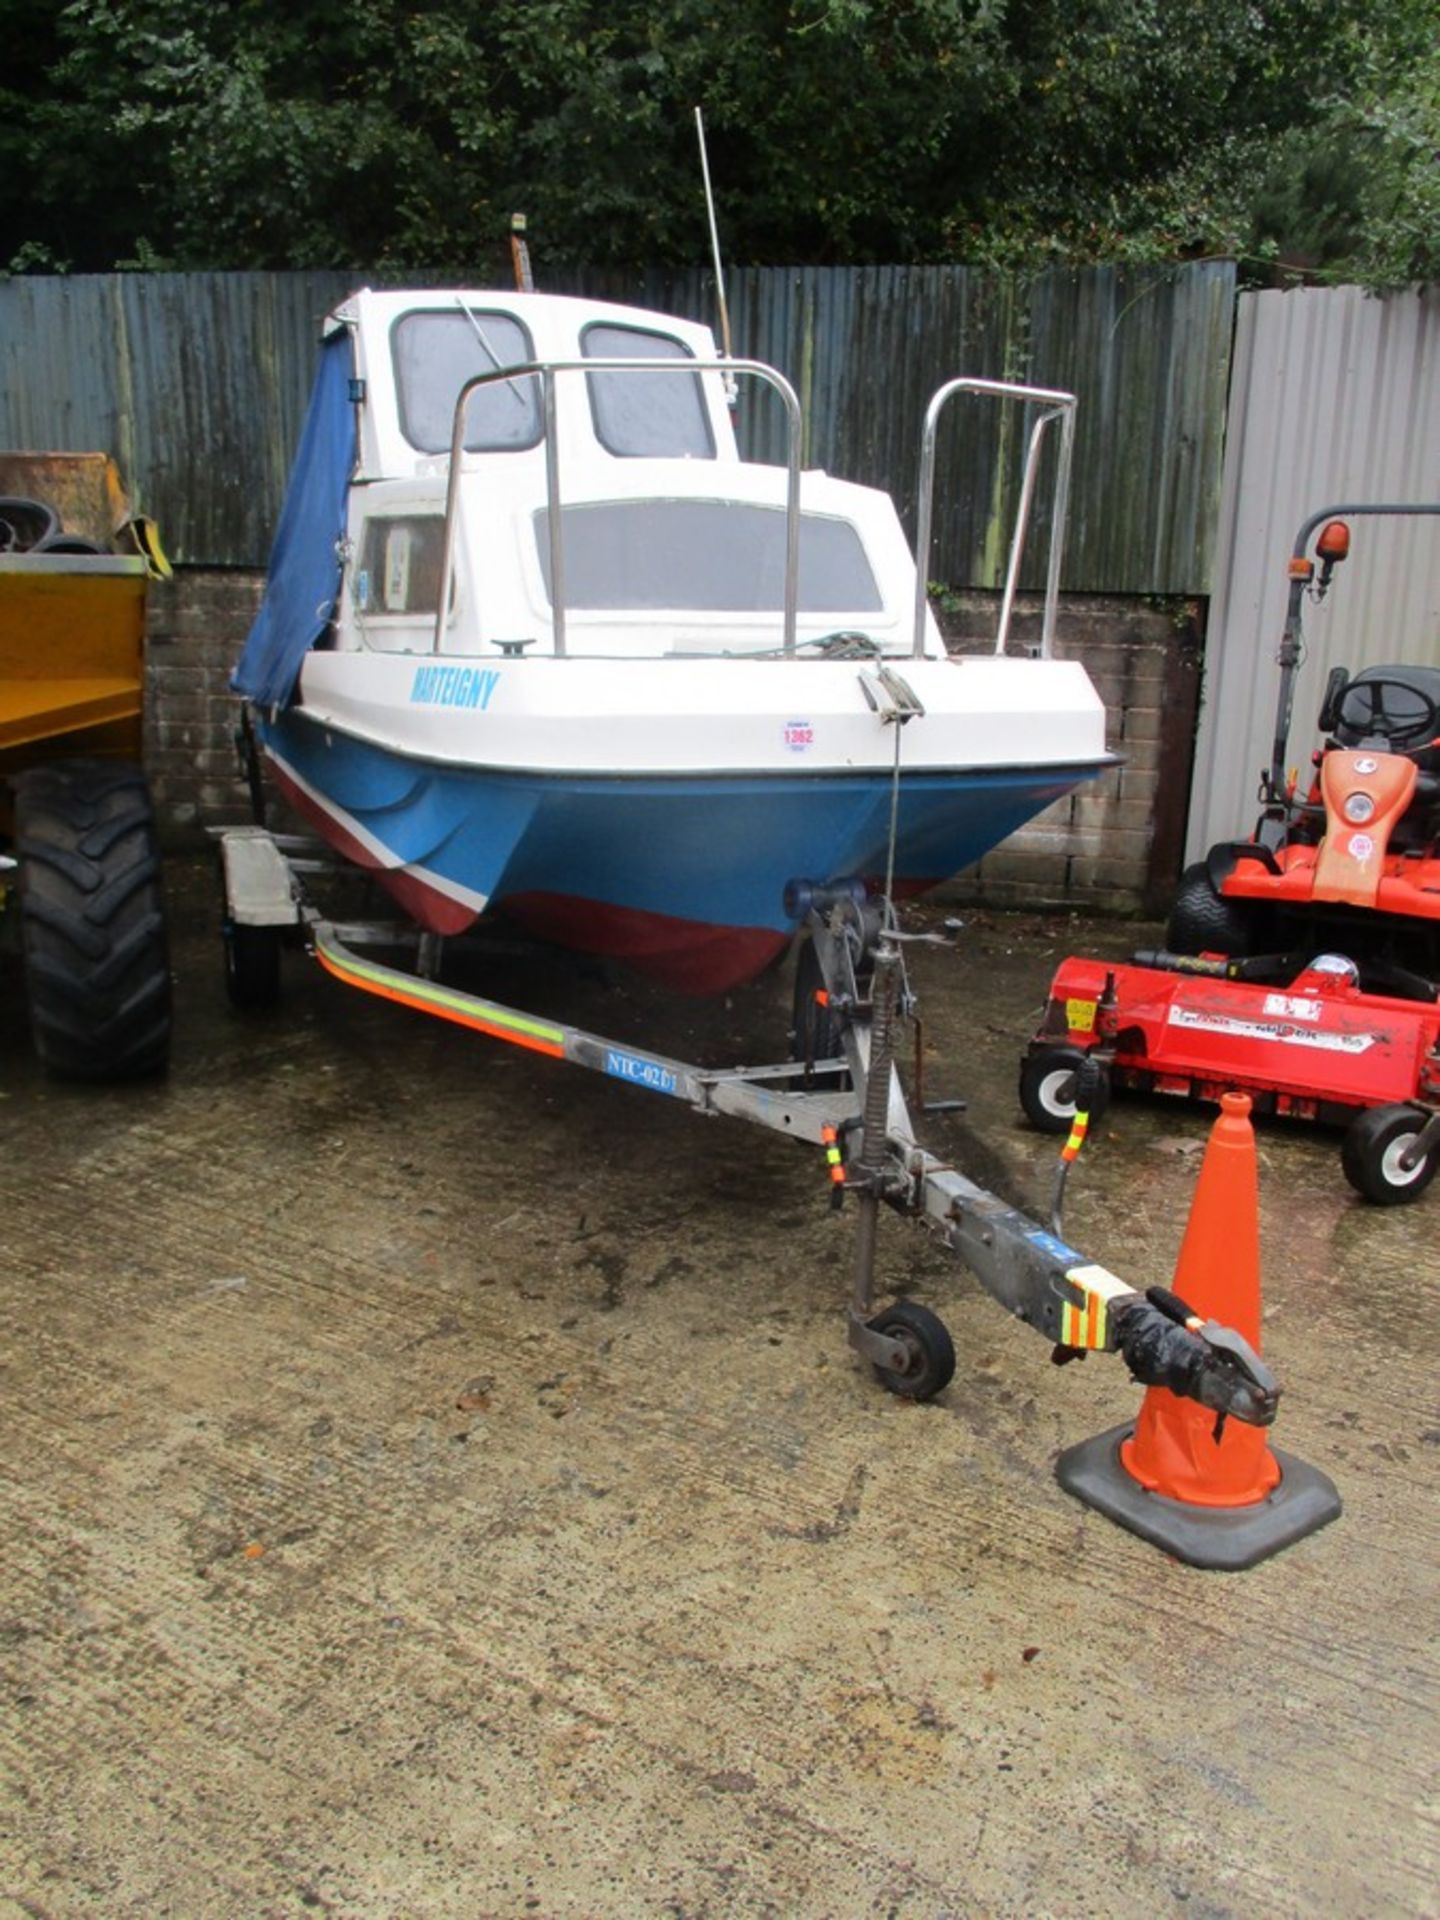 WILSON FLYER 17FT FISHER C/W 2014 MARINER 40HP OUTBOARD, BRAKED TRAILER WITH HUB WASH, SHIP TO